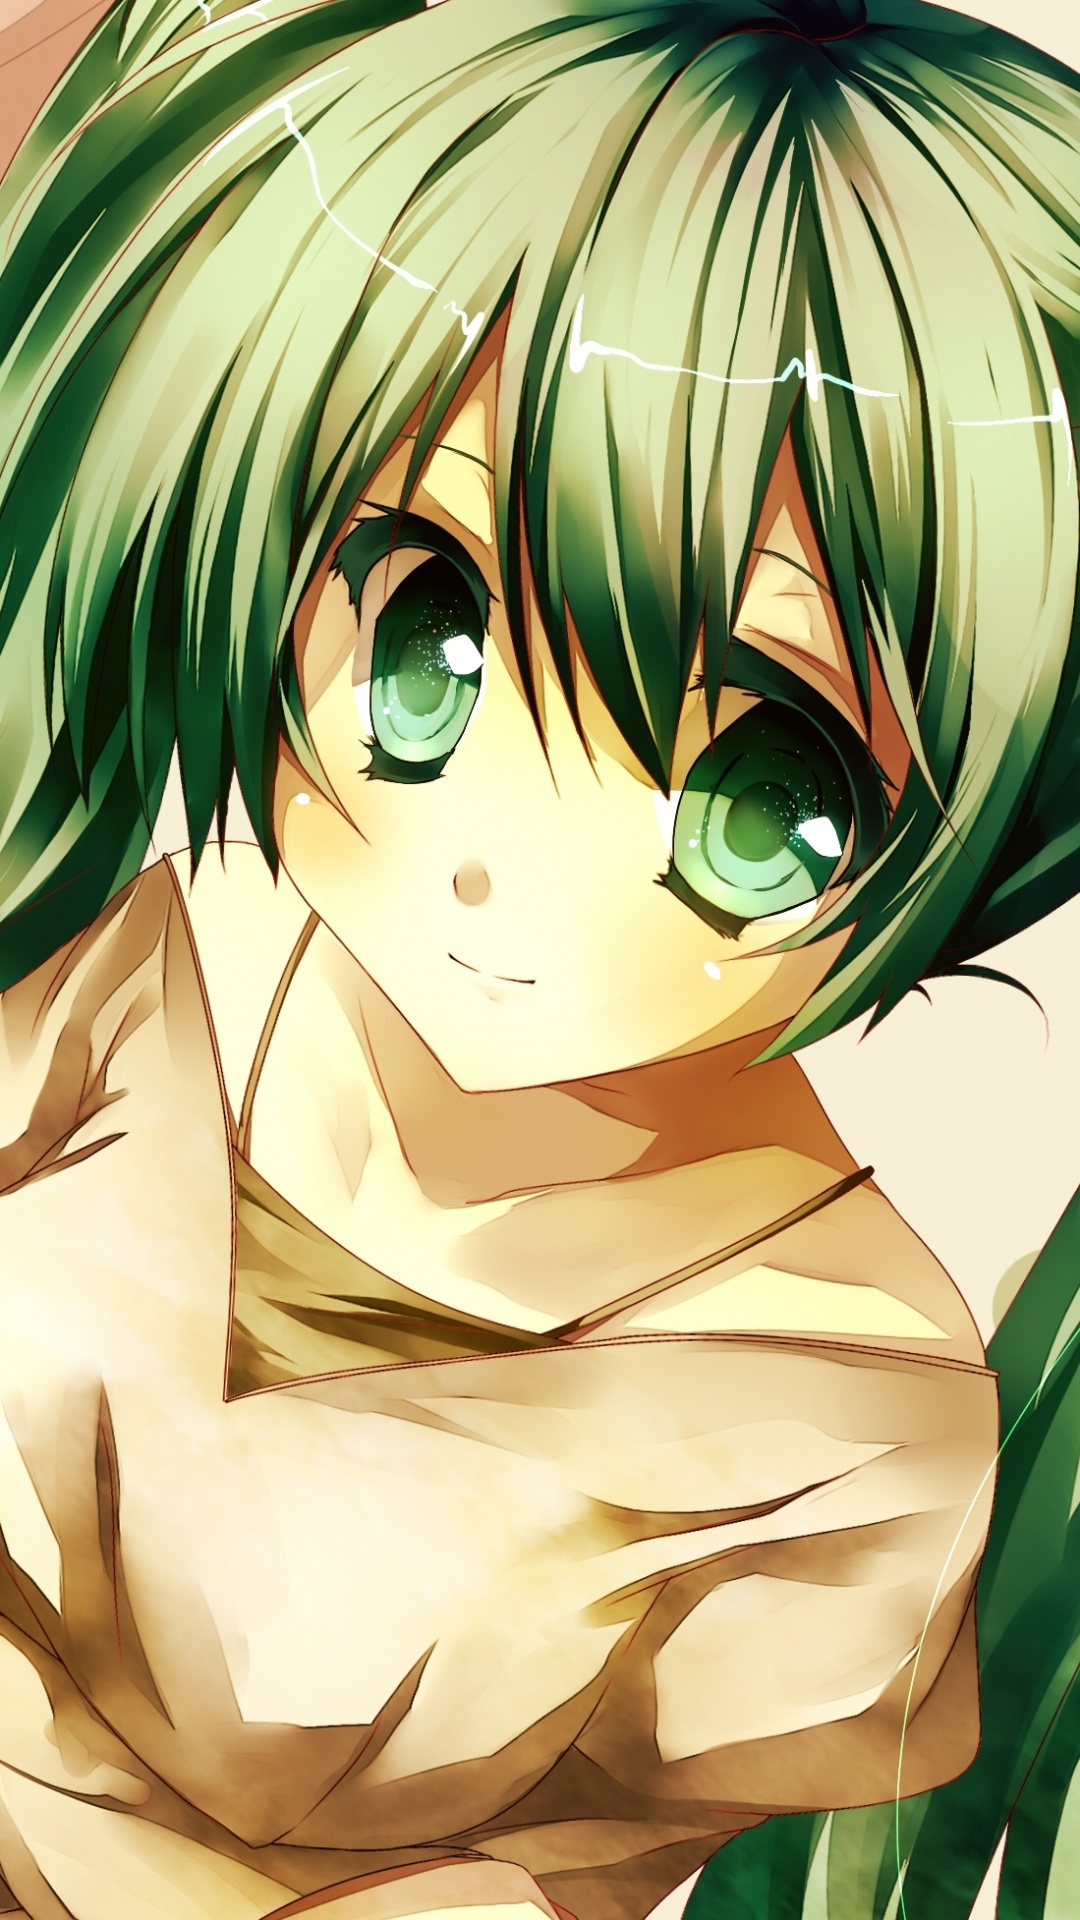 Green Haired Male Anime Character. Wallpaper in 1080x1920 Resolution